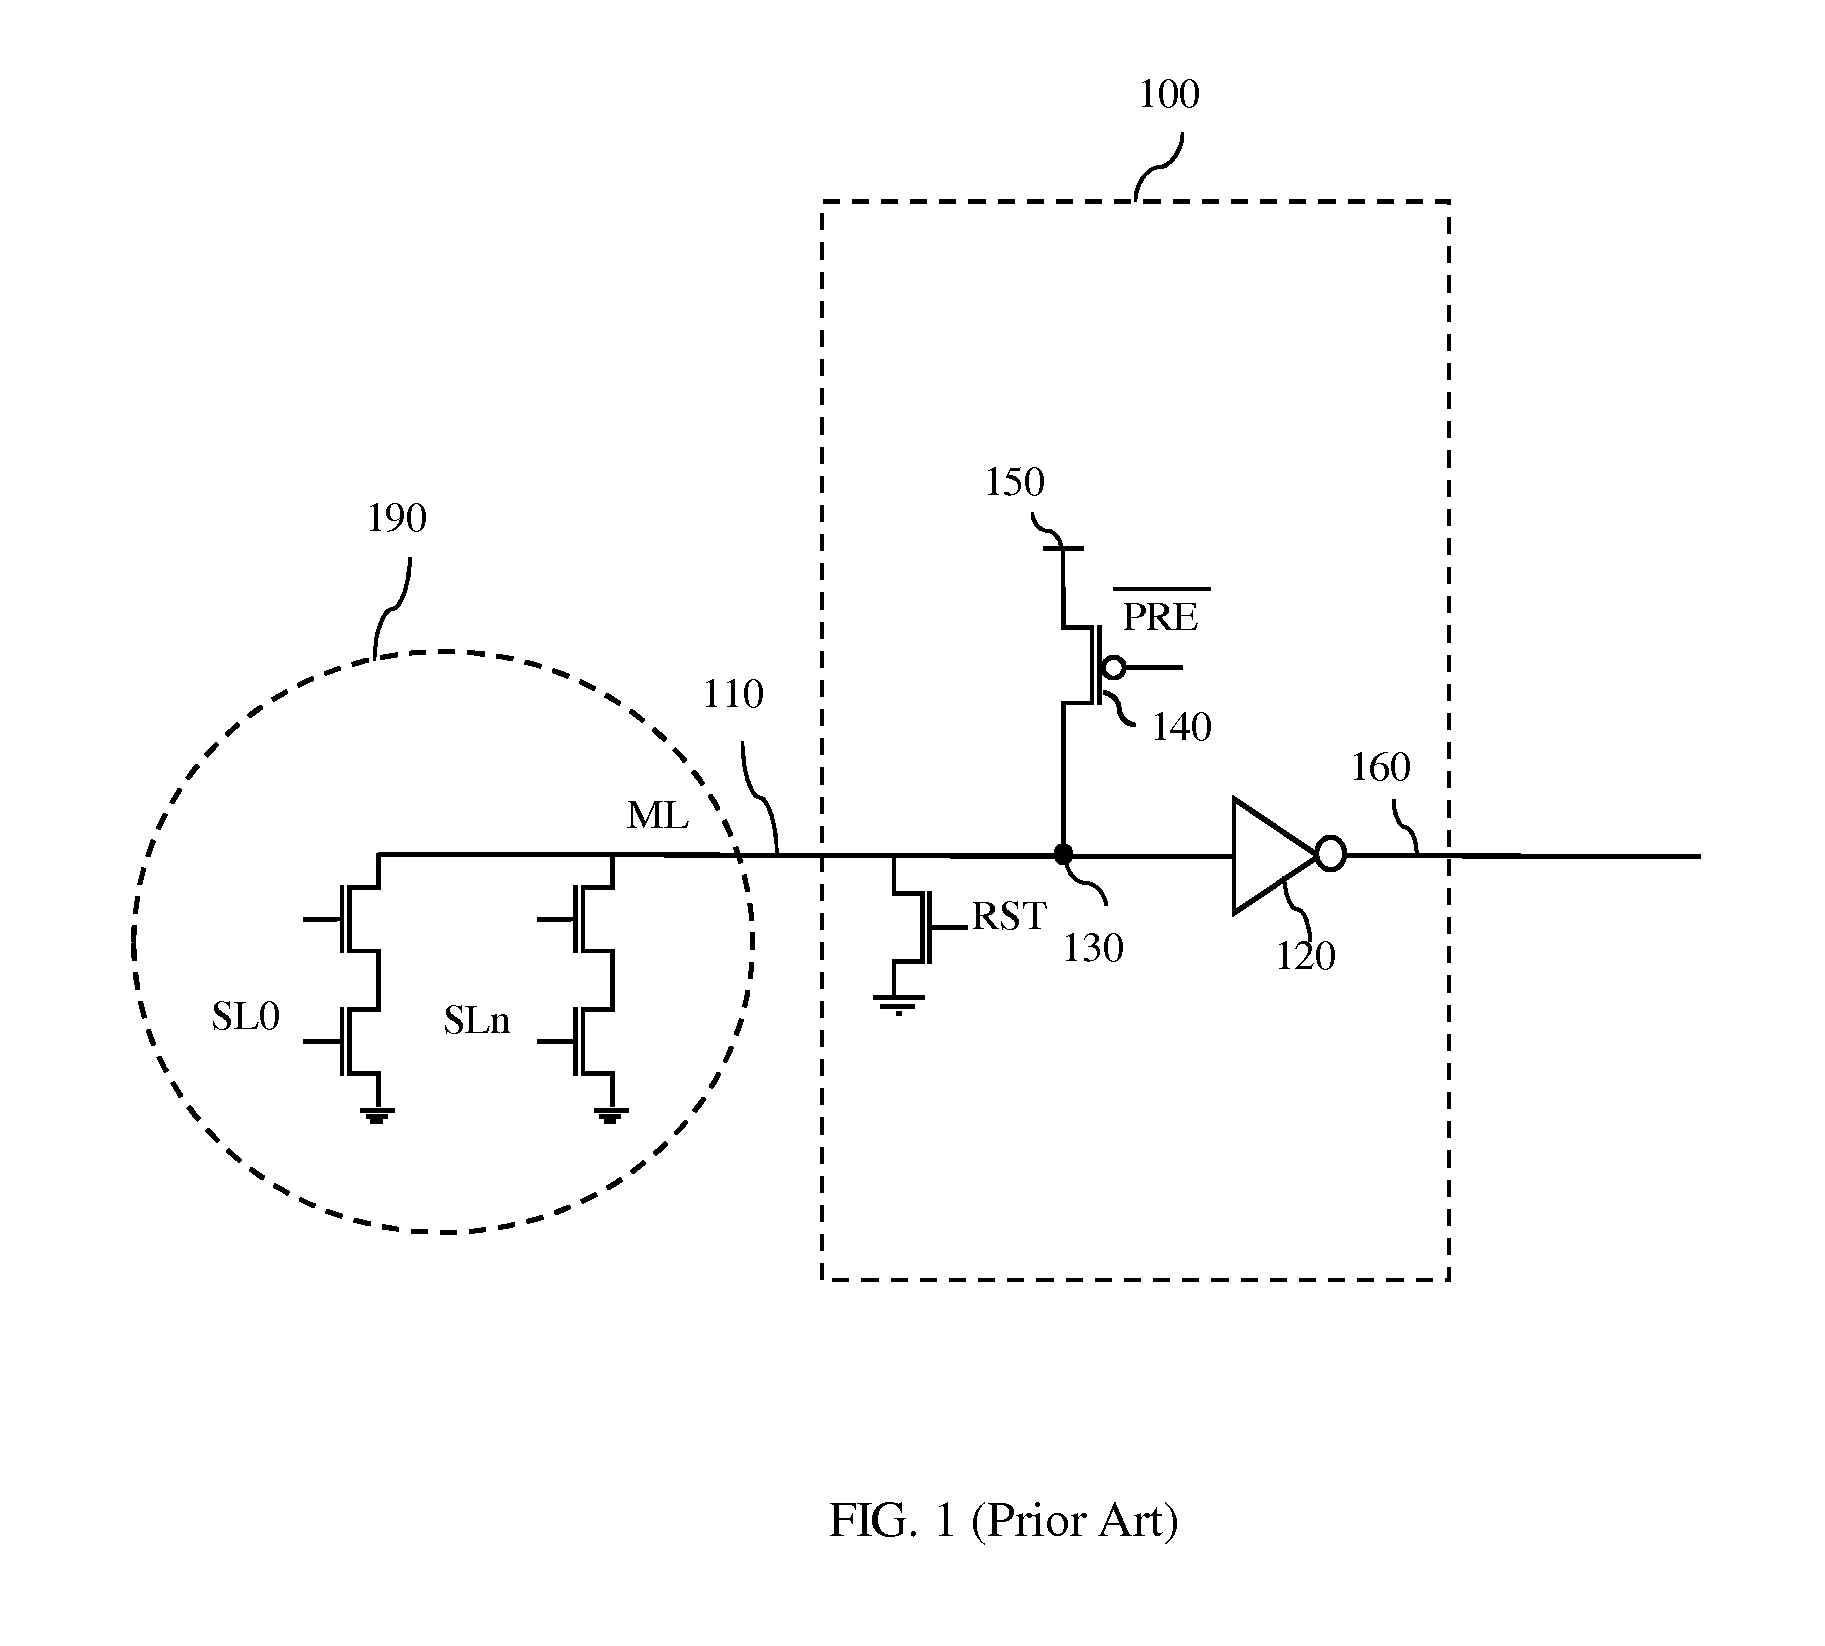 Single ended sensing circuits for signal lines